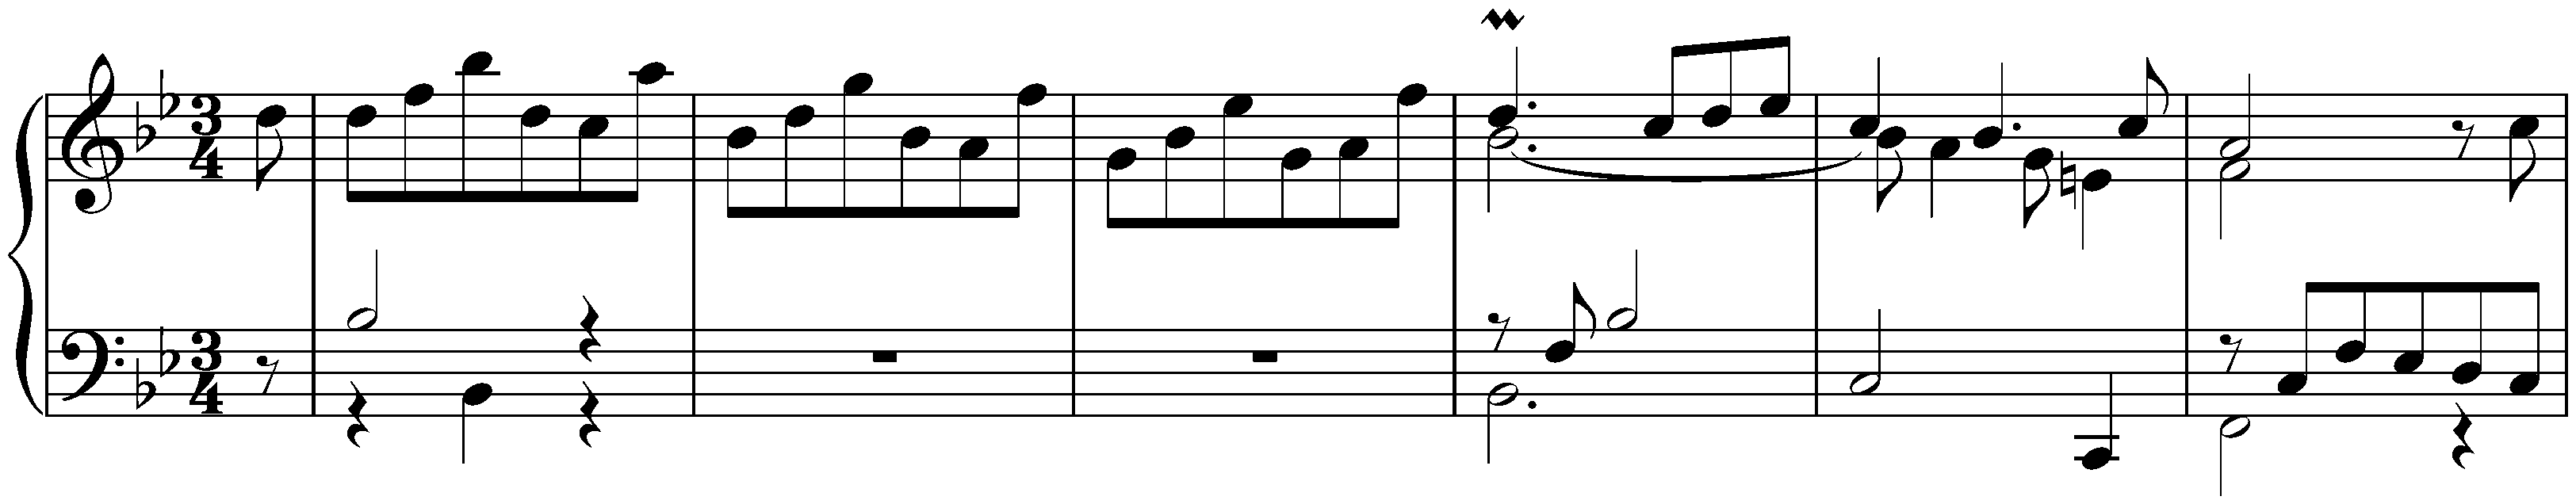 Suite in B-flat major, BWV 821; 3. Courante